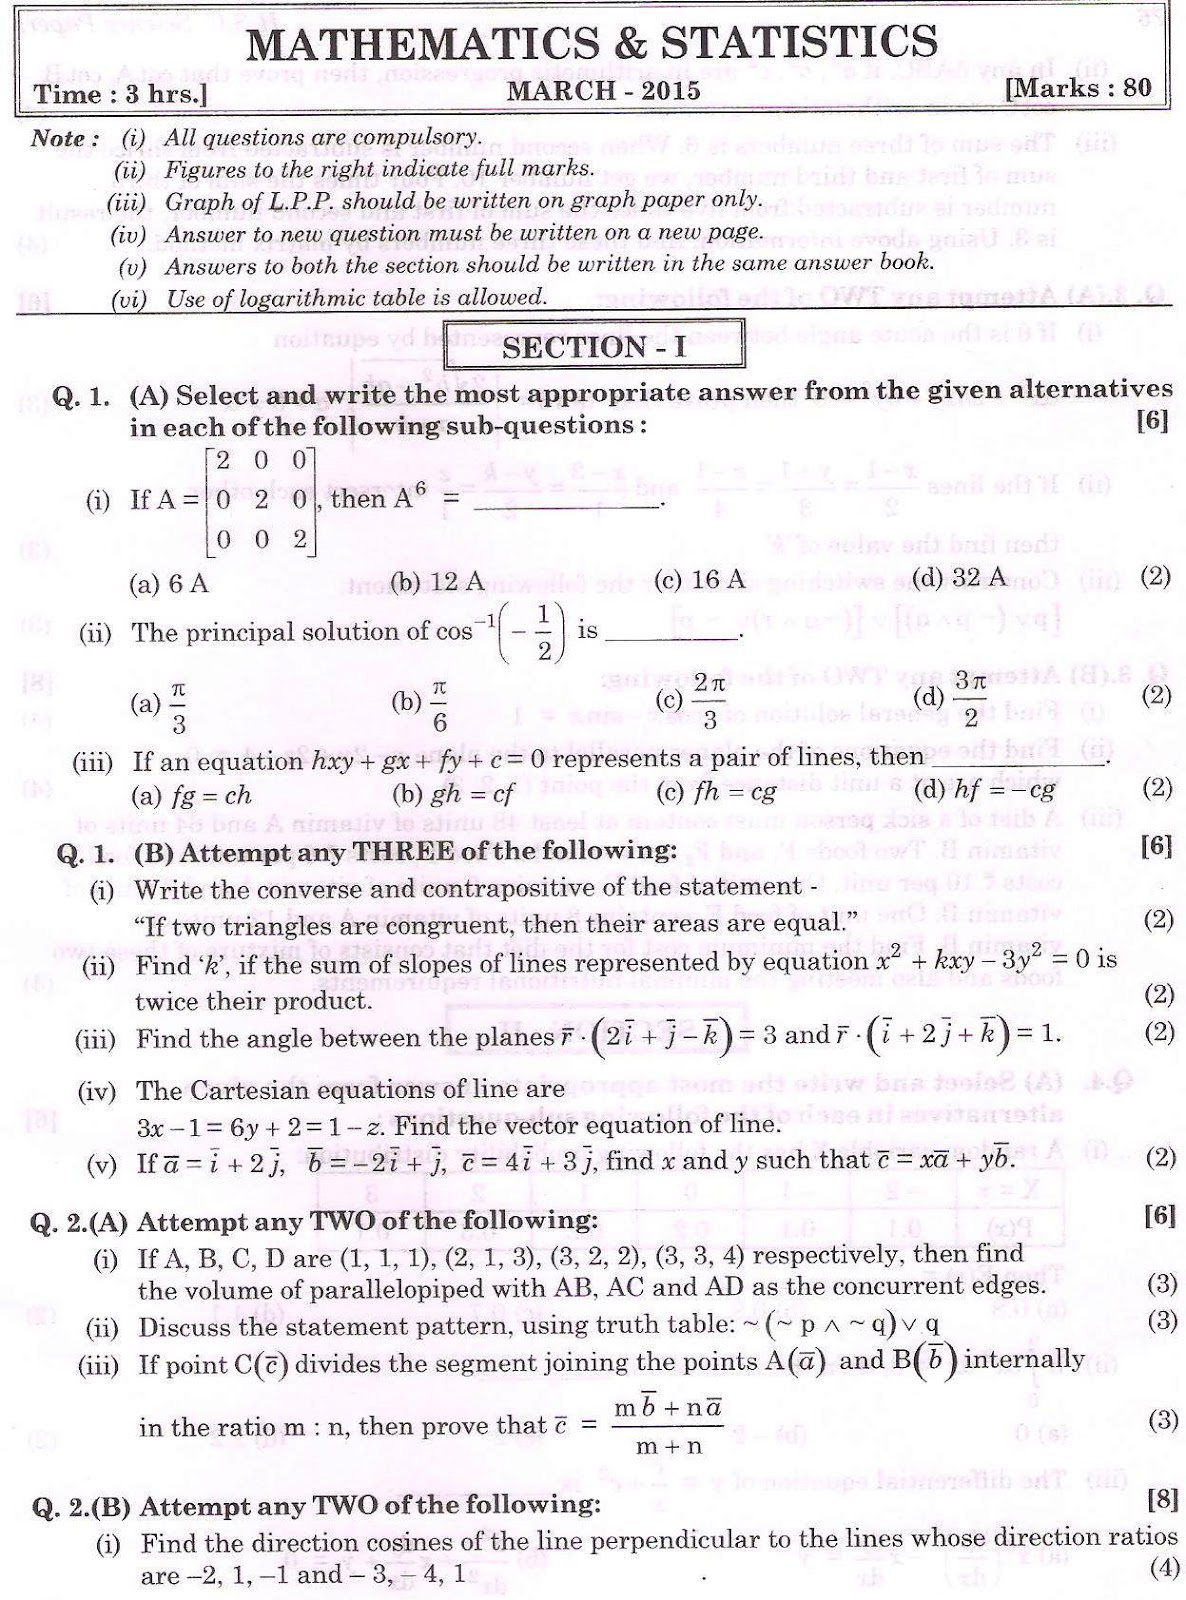 chemistry hsc syllabus in word document